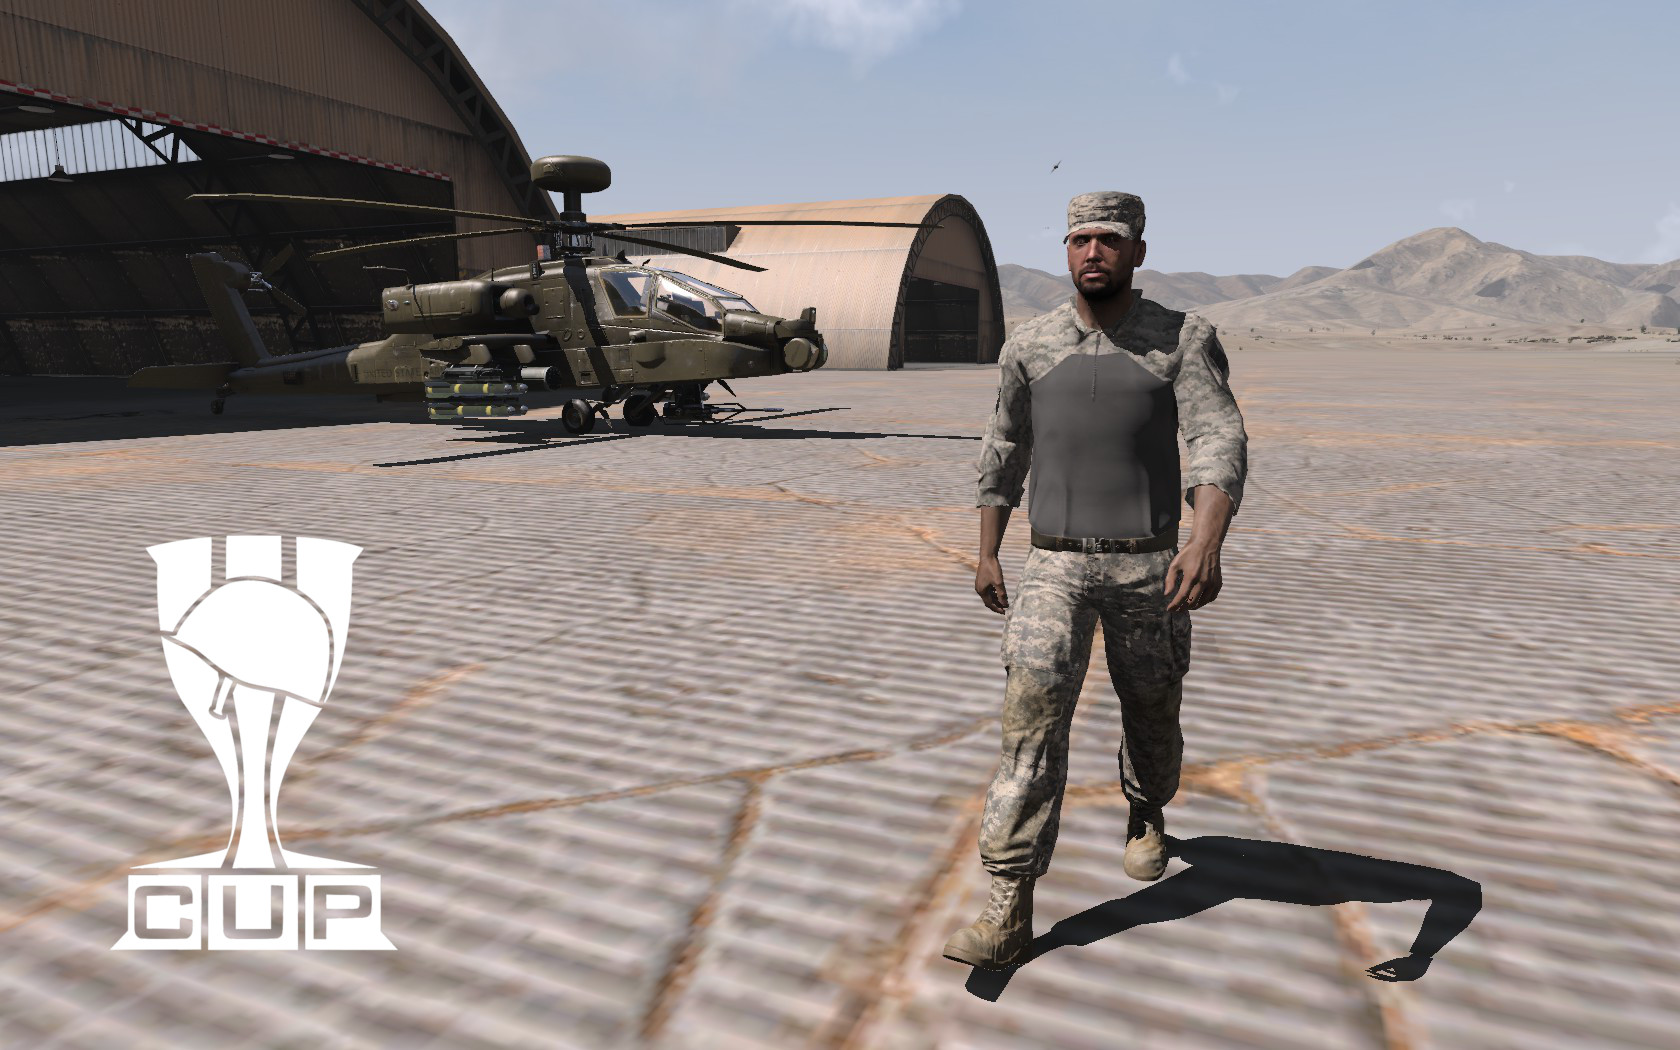 Cup arma. Cup Mod Arma 3. Арма 3 Cup мод. Community upgrade Project Cup Arma 3. Арма 3 Cup vehicles.